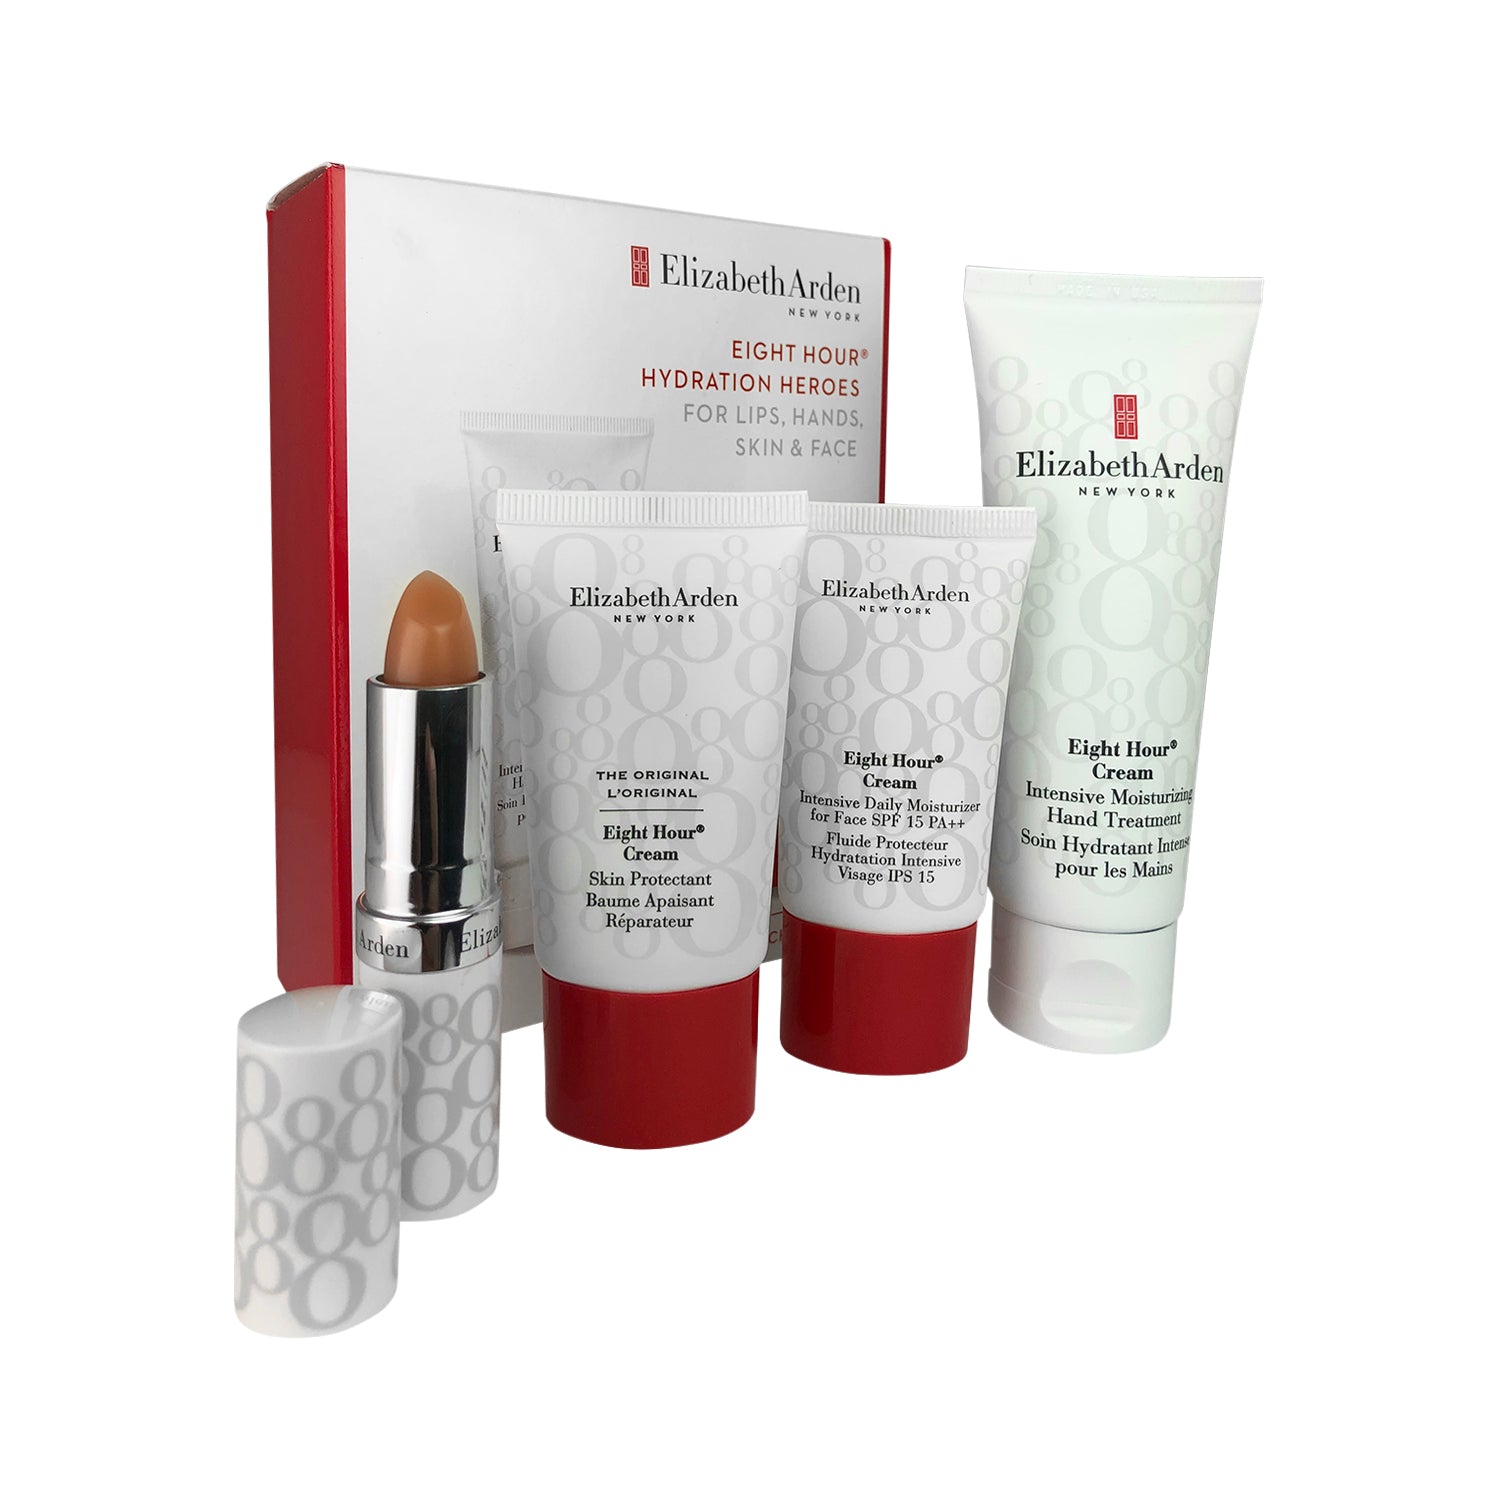 Elizabeth Arden Eight Hour Hydration Heroes For Lips, Hands, Skin & Face 4 Pc. Set